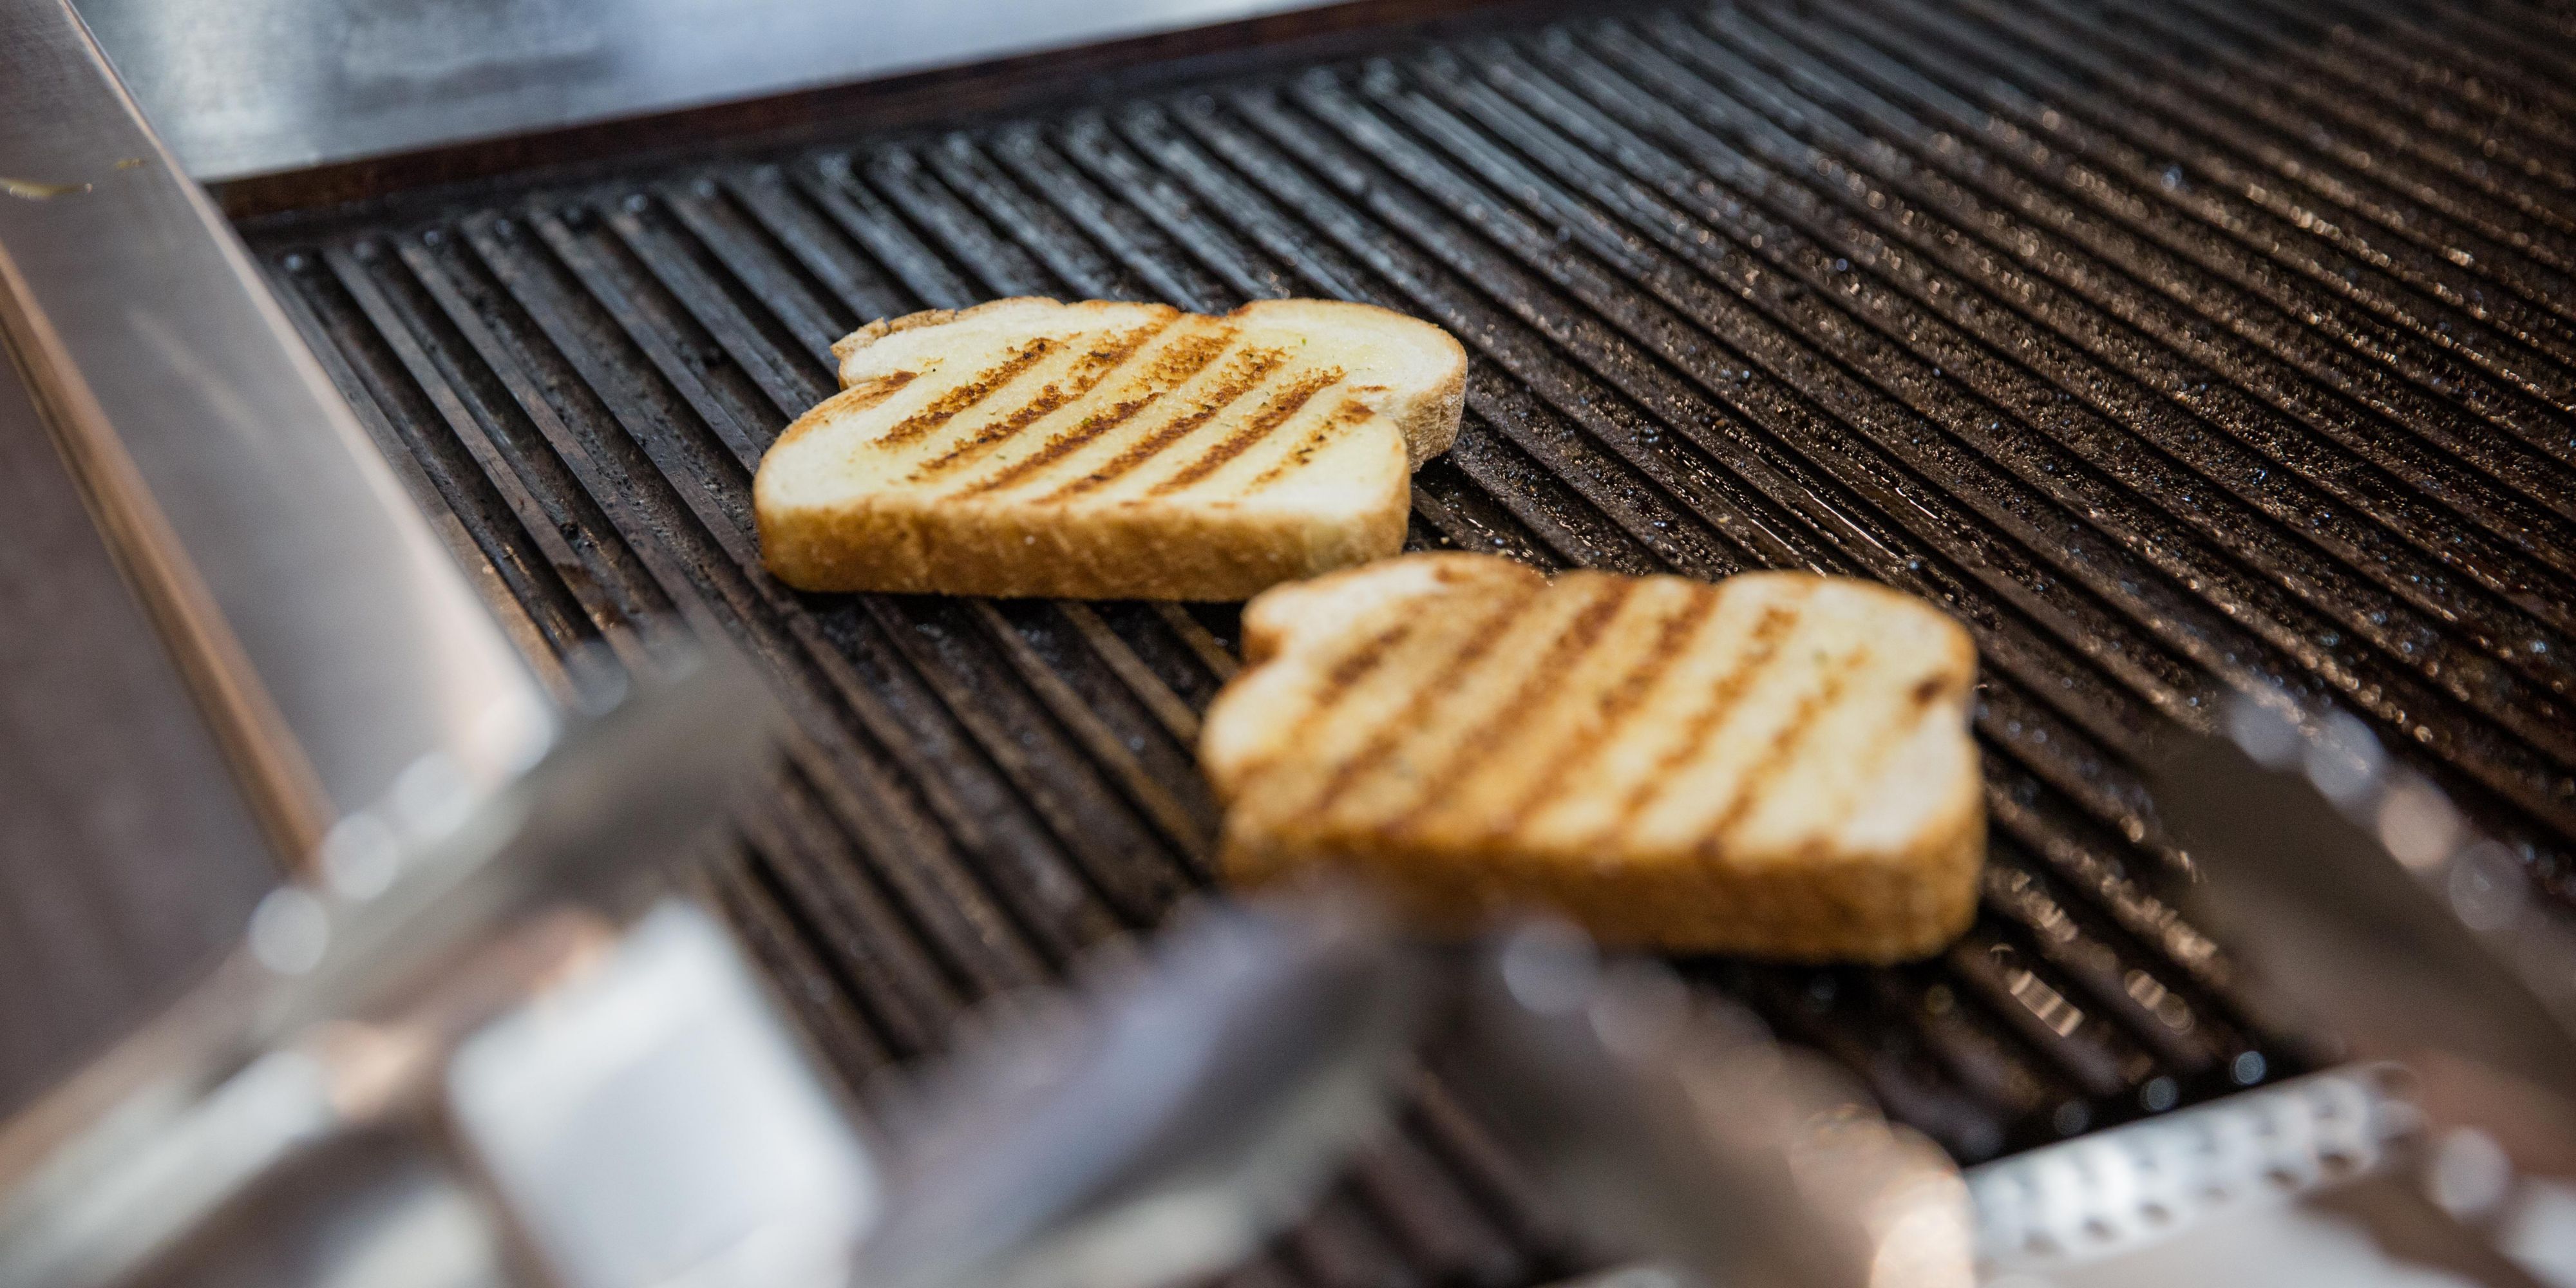 Enjoy the smell and taste of hot grilled bread.